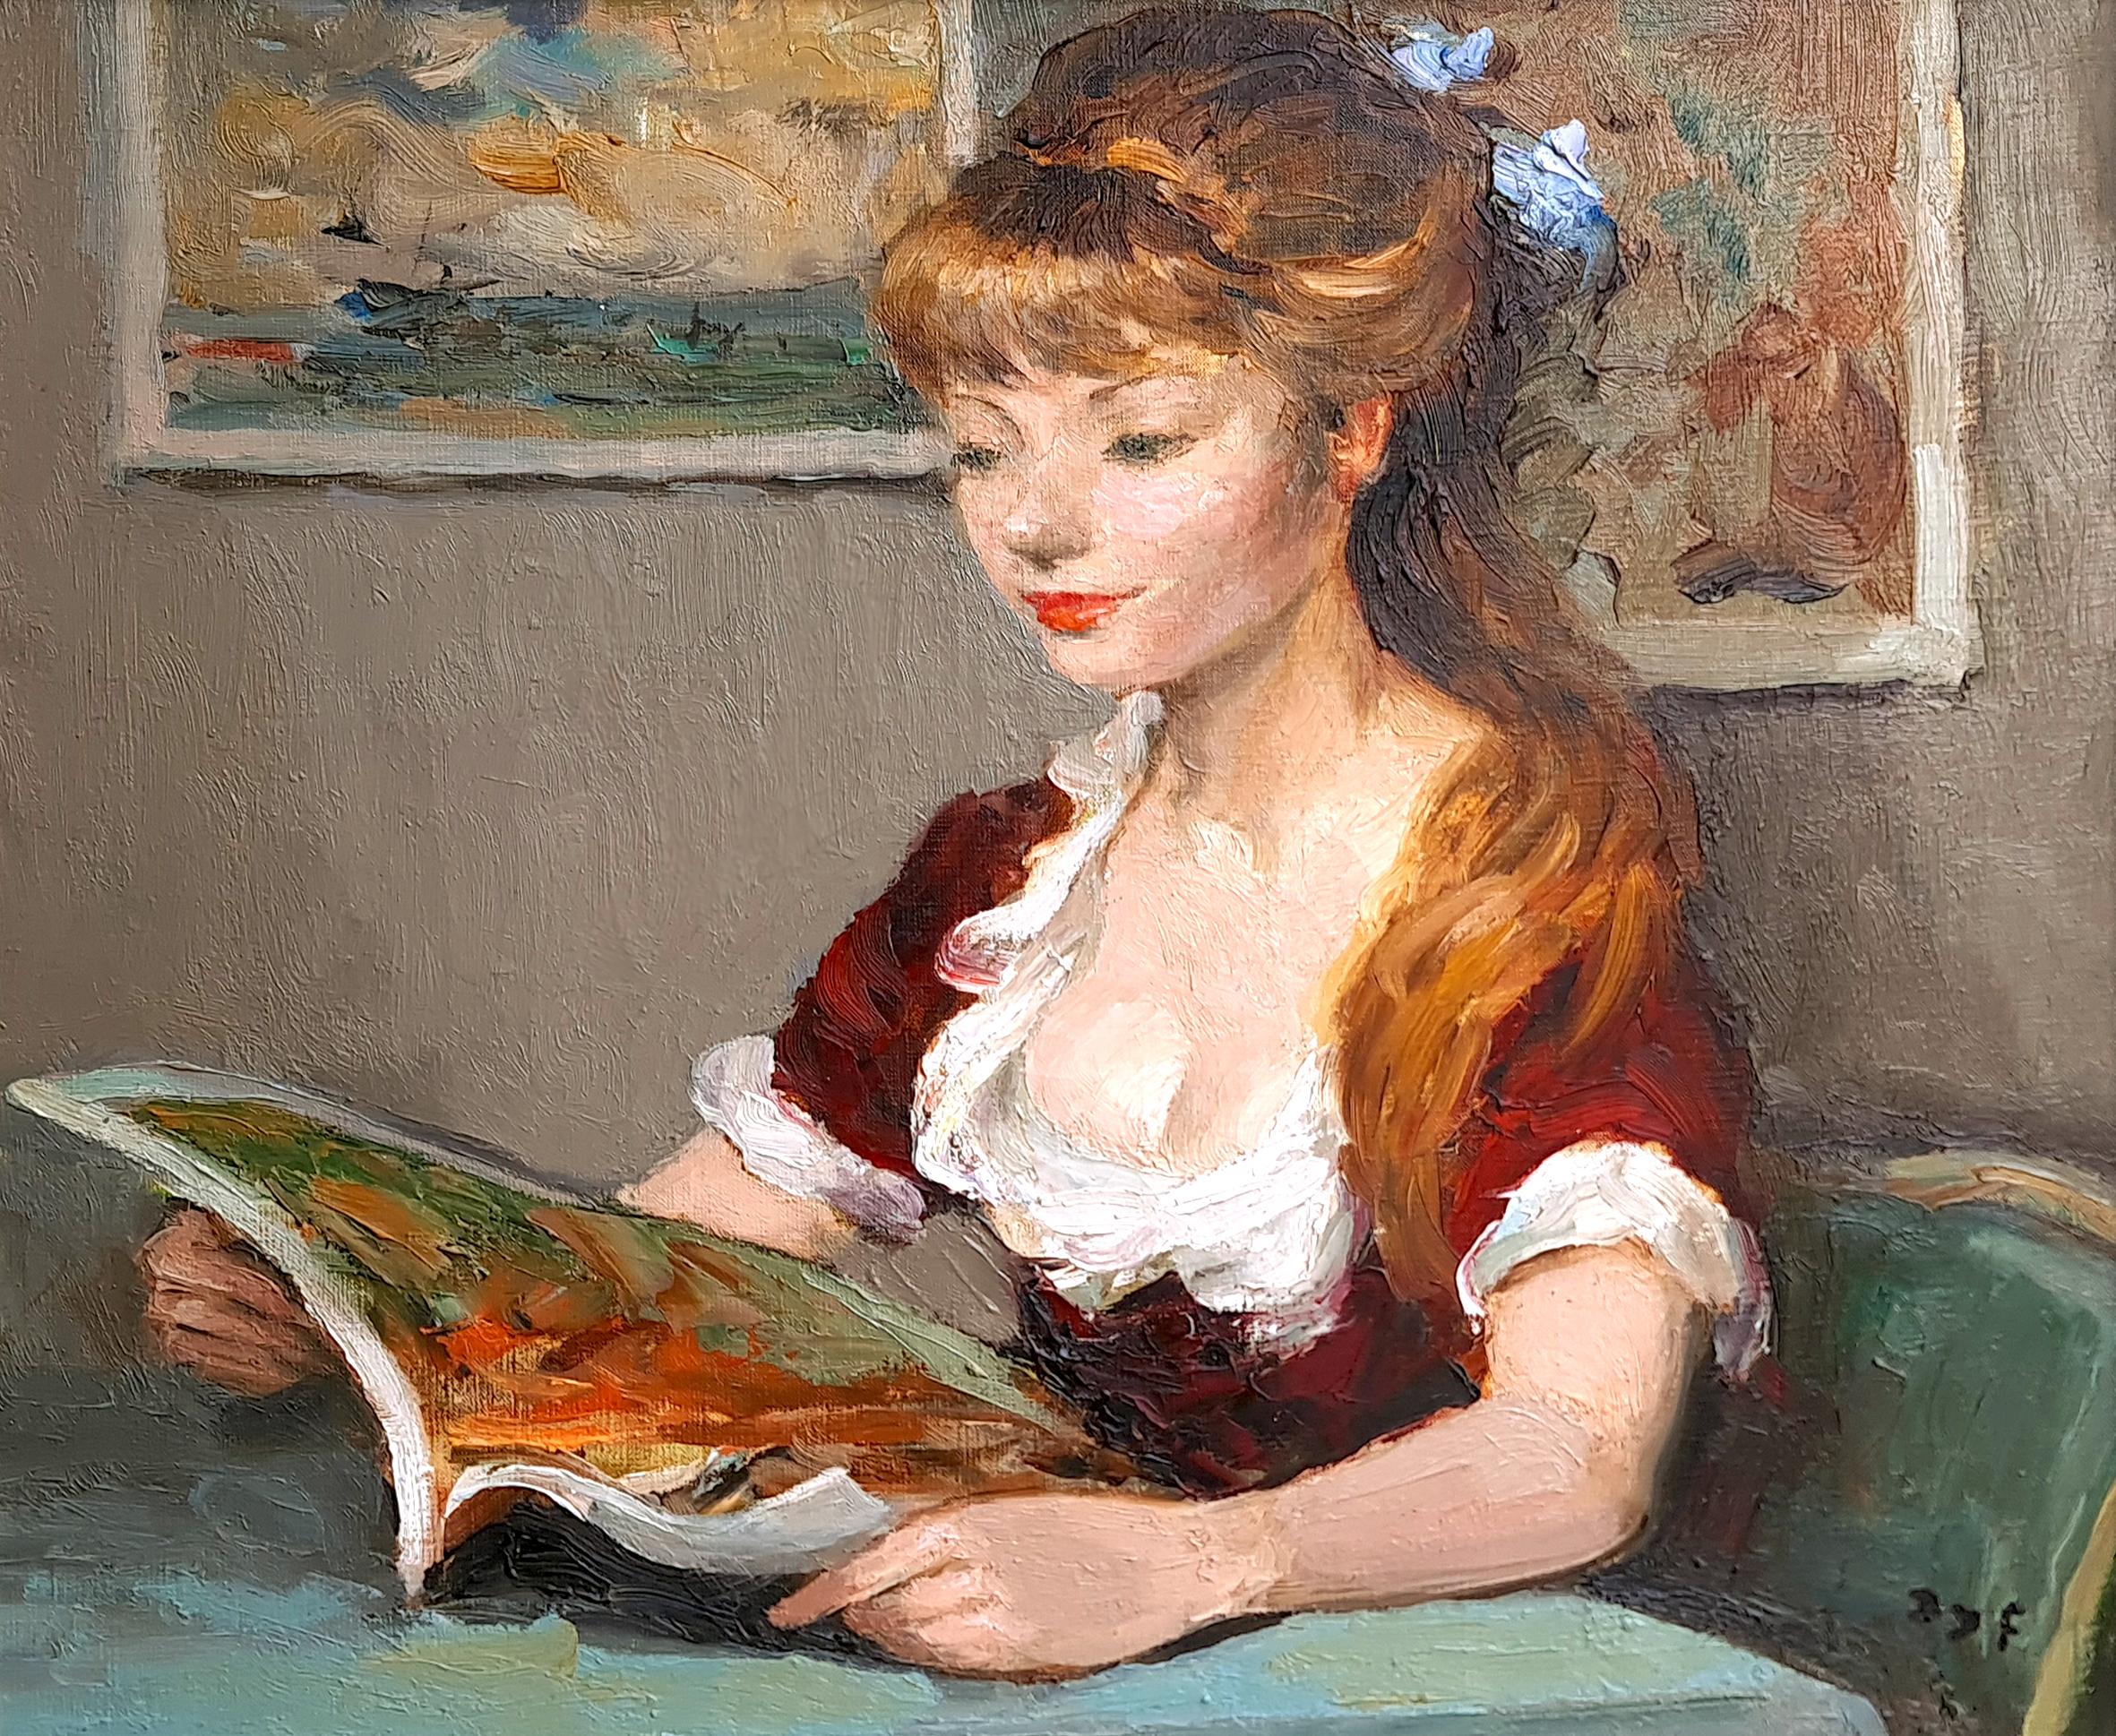 Claudine Reading - Painting by Marcel Dyf